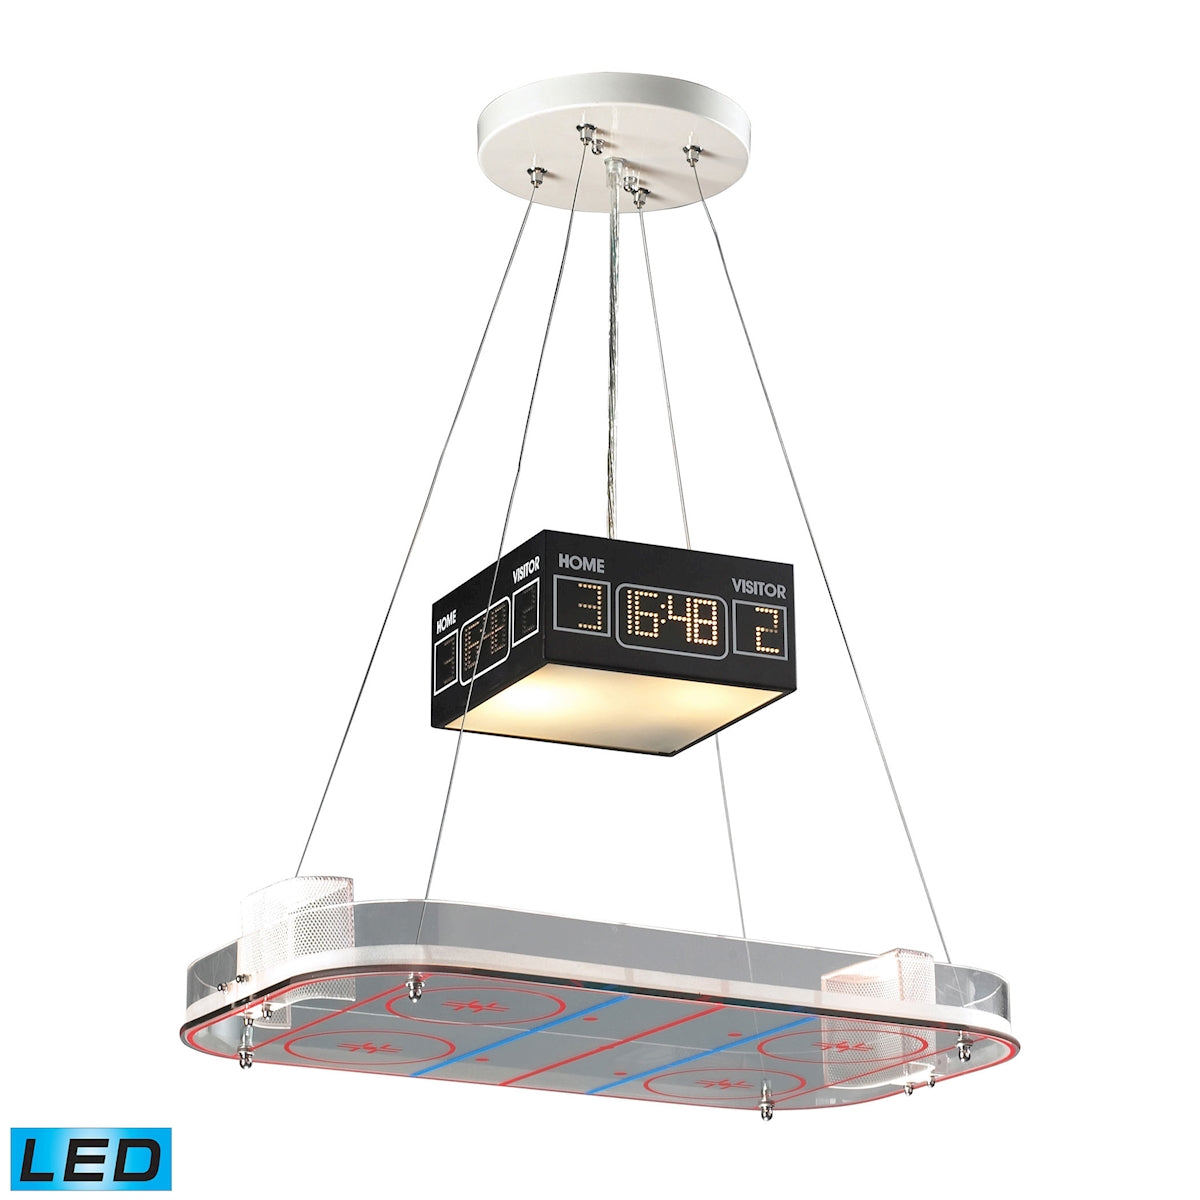 ELK Lighting 5138/2-LED - Novelty 22" Wide Pendant in Silver with Hockey Arena Motif - Includes LED